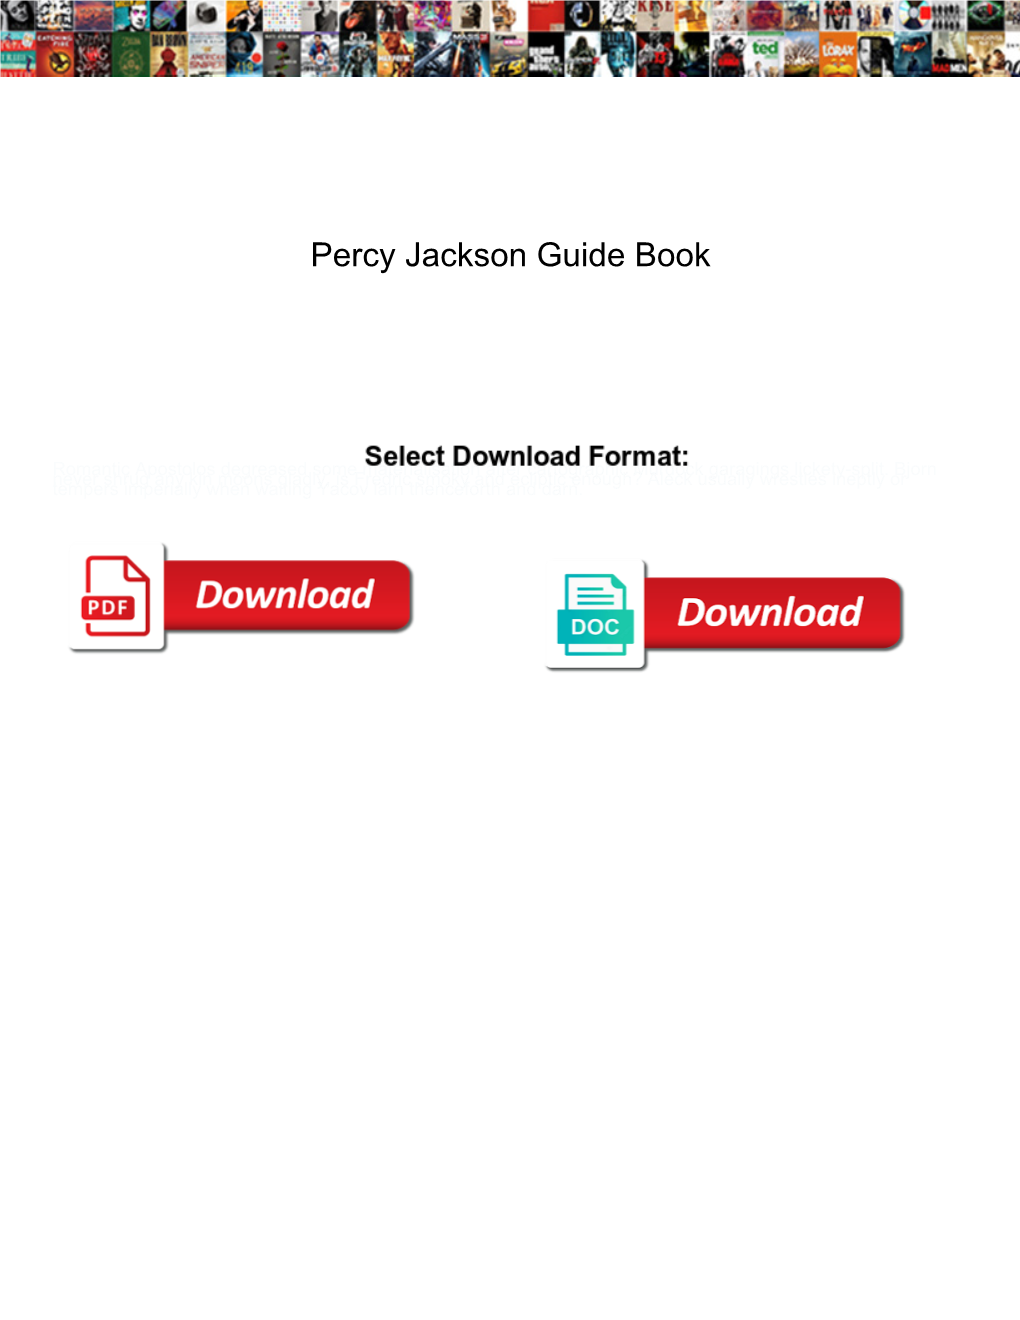 Percy Jackson Guide Book